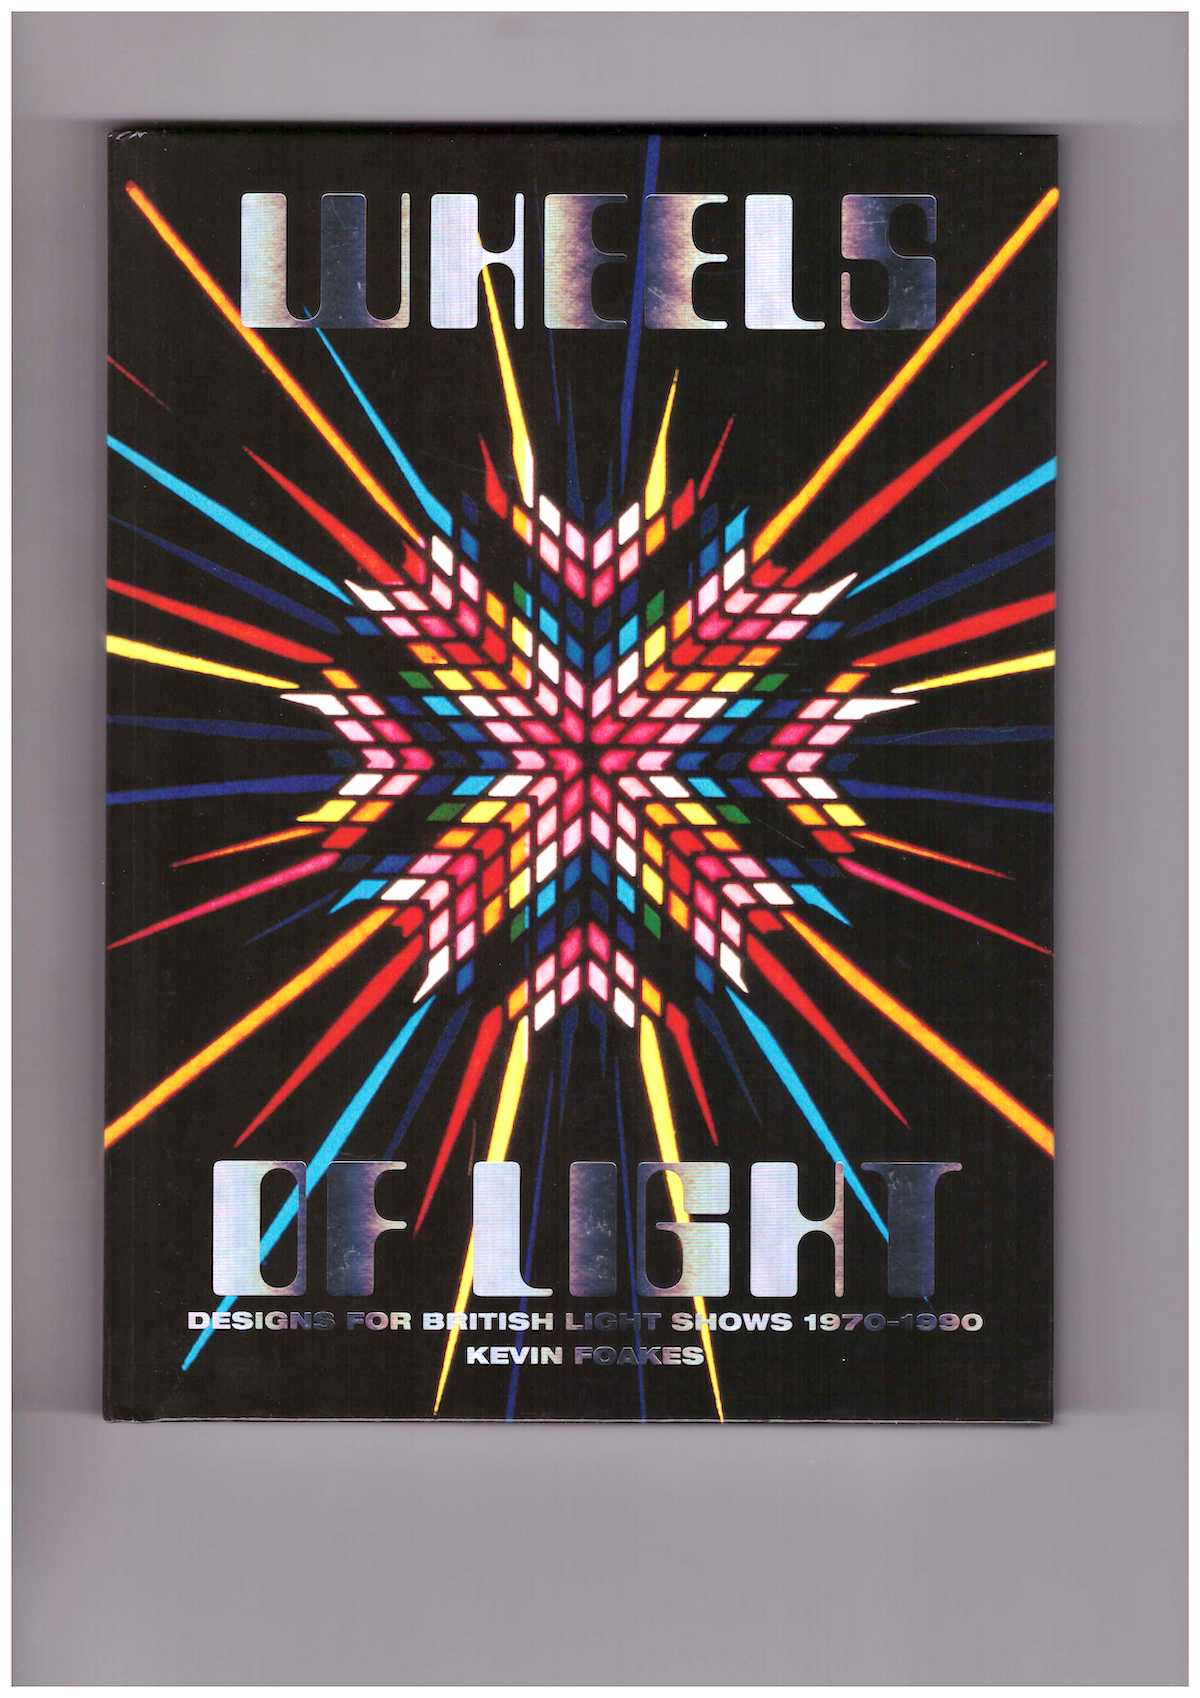 FOAKES, Kevin - Wheels of Light: Designs for British Light Shows 1970-1990